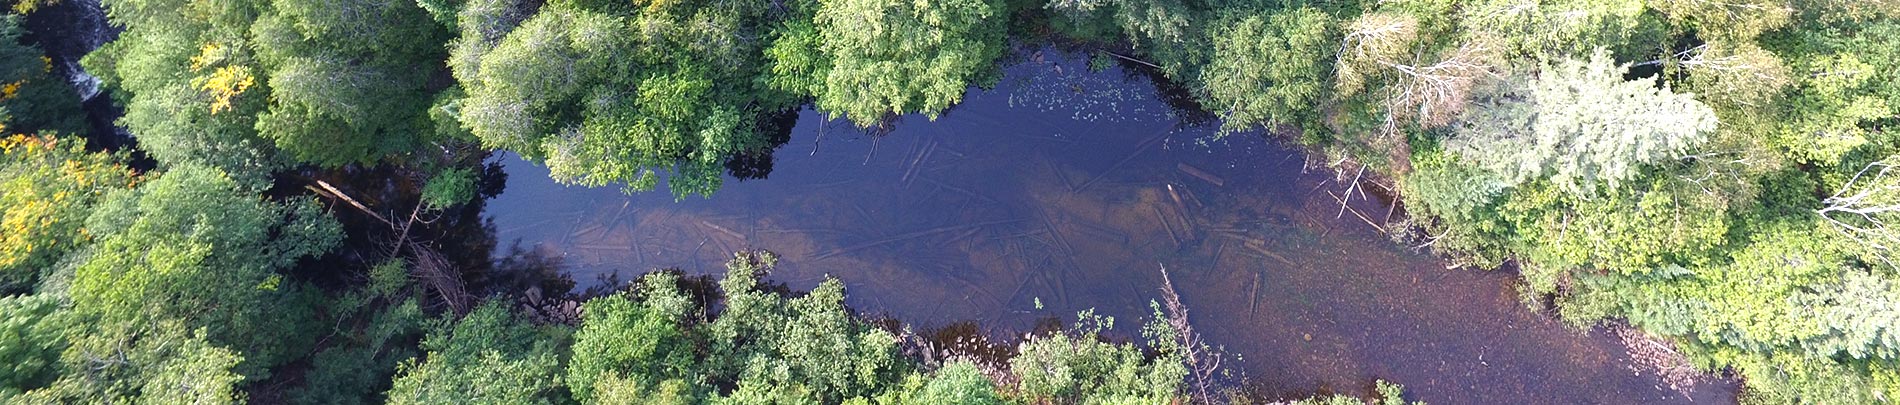 An aerial view of a river winding through the trees.